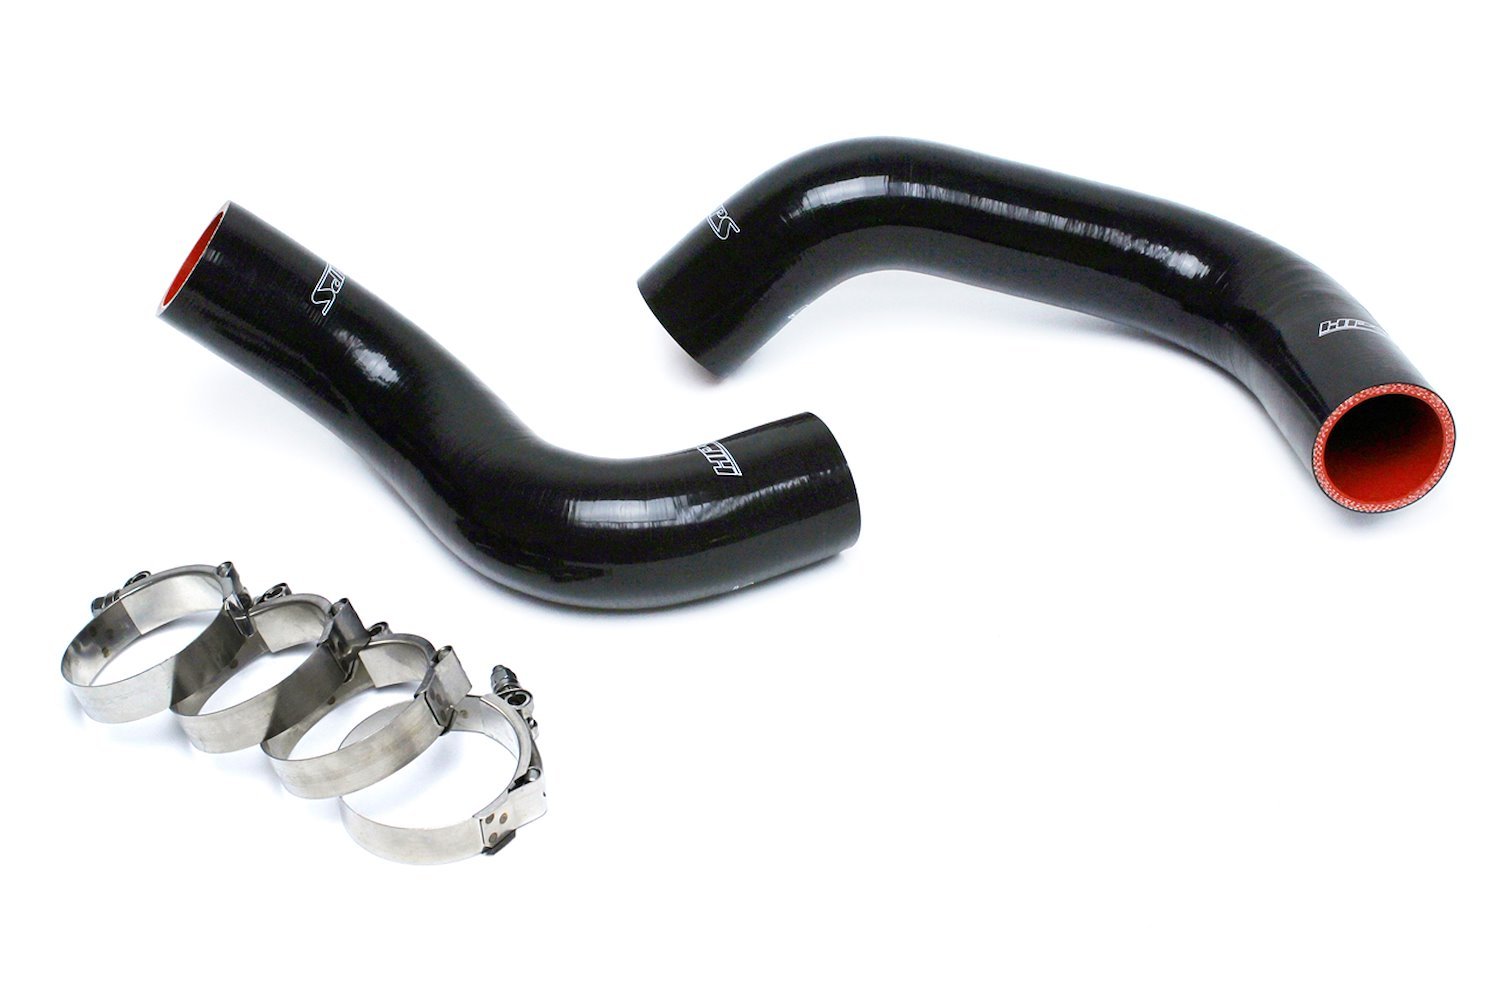 57-1498R-BLK Radiator Hose Kit, High-Temp 3-Ply Reinforced Silicone, Replace OEM Rubber Radiator Coolant Hoses